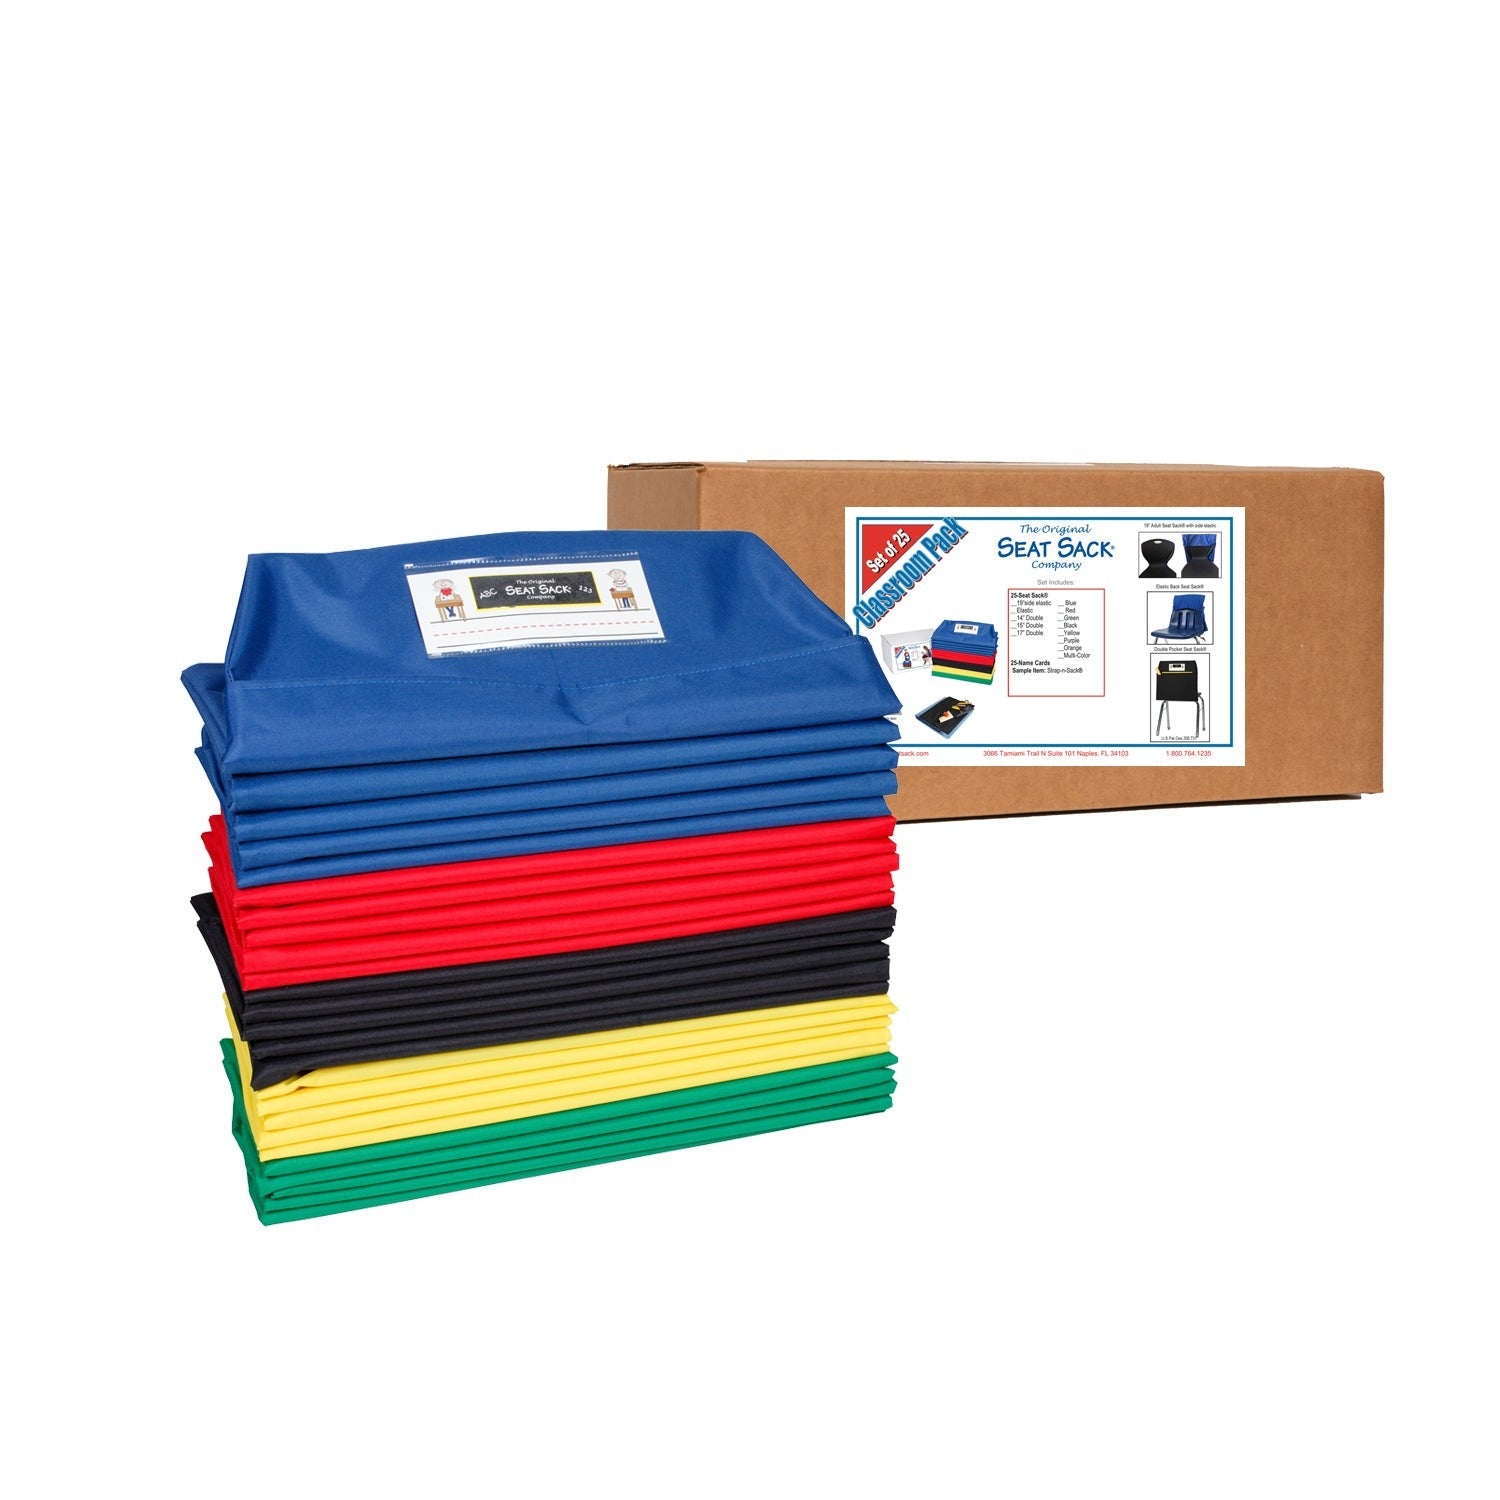 Seat Sack Special Sizes Classroom Pack Box with Multi-Color Chair Pockets